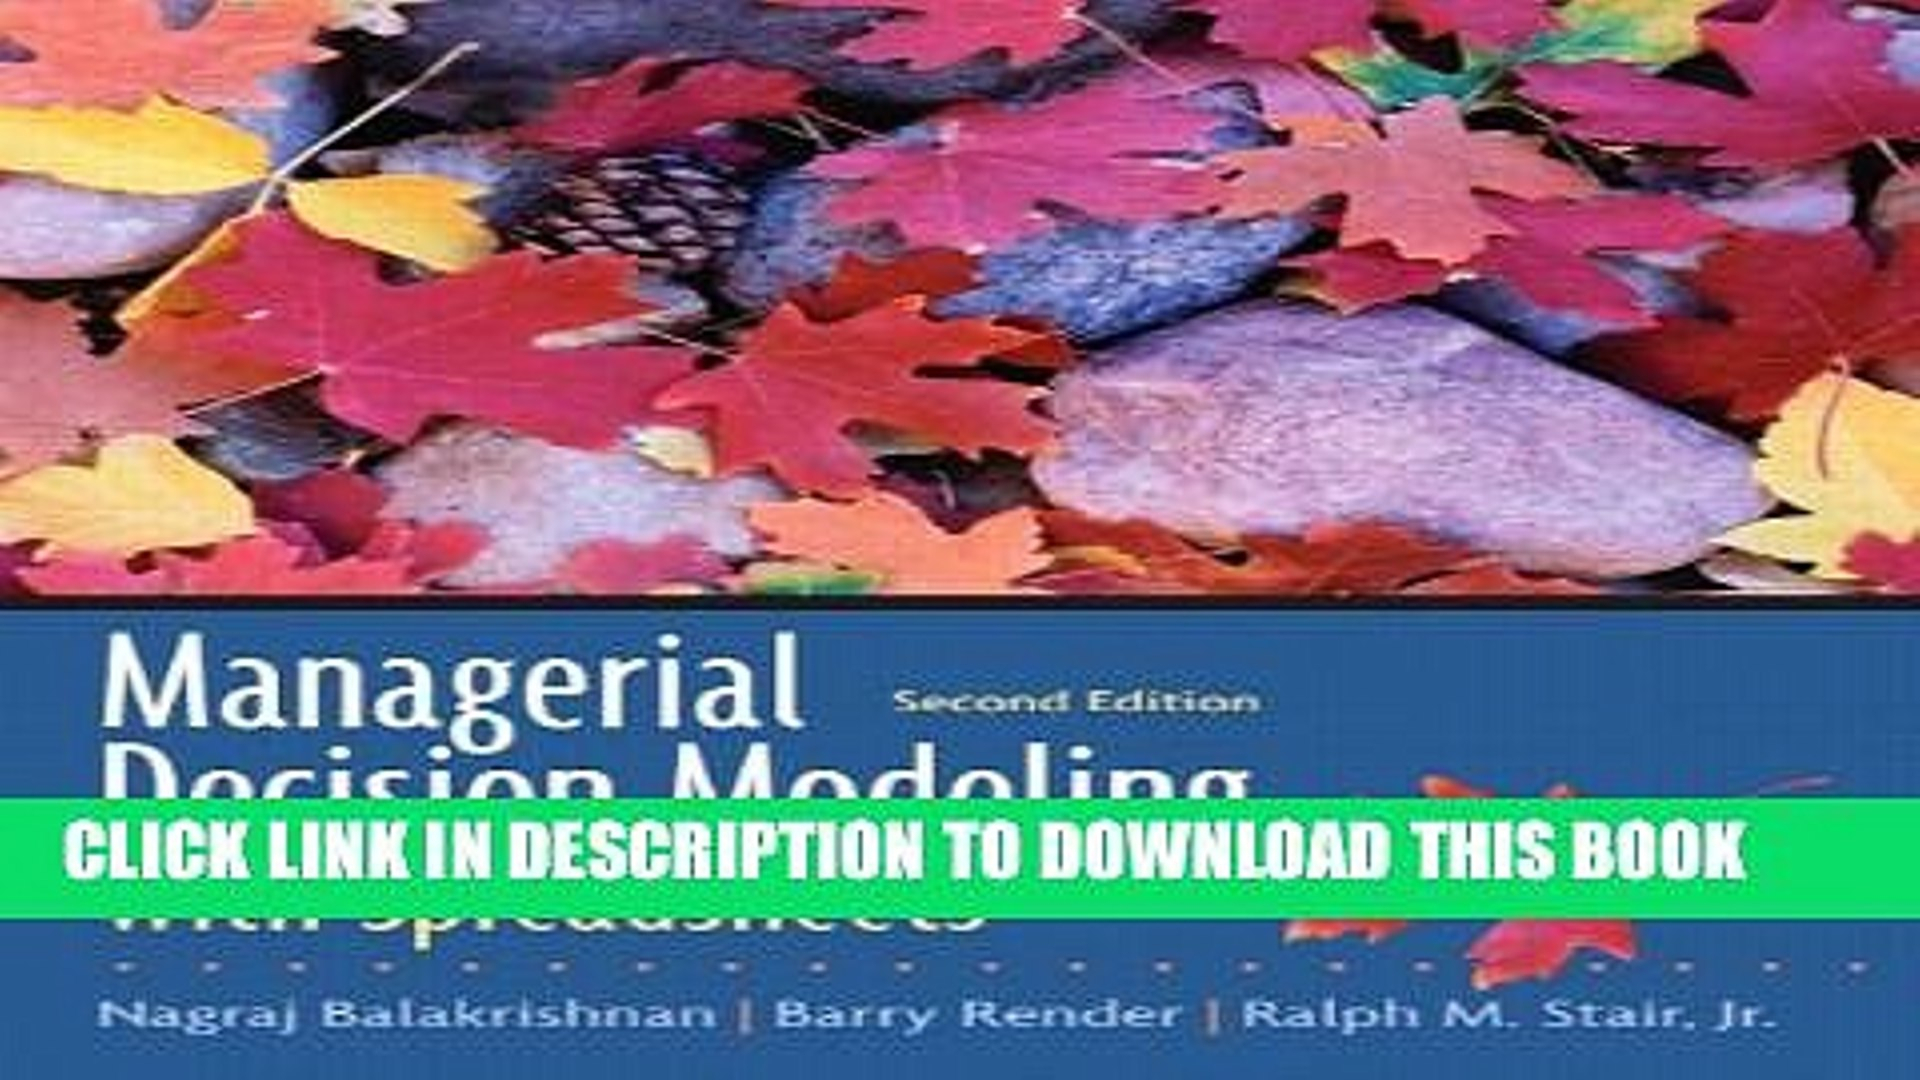 managerial decision modeling with spreadsheets pdf free download